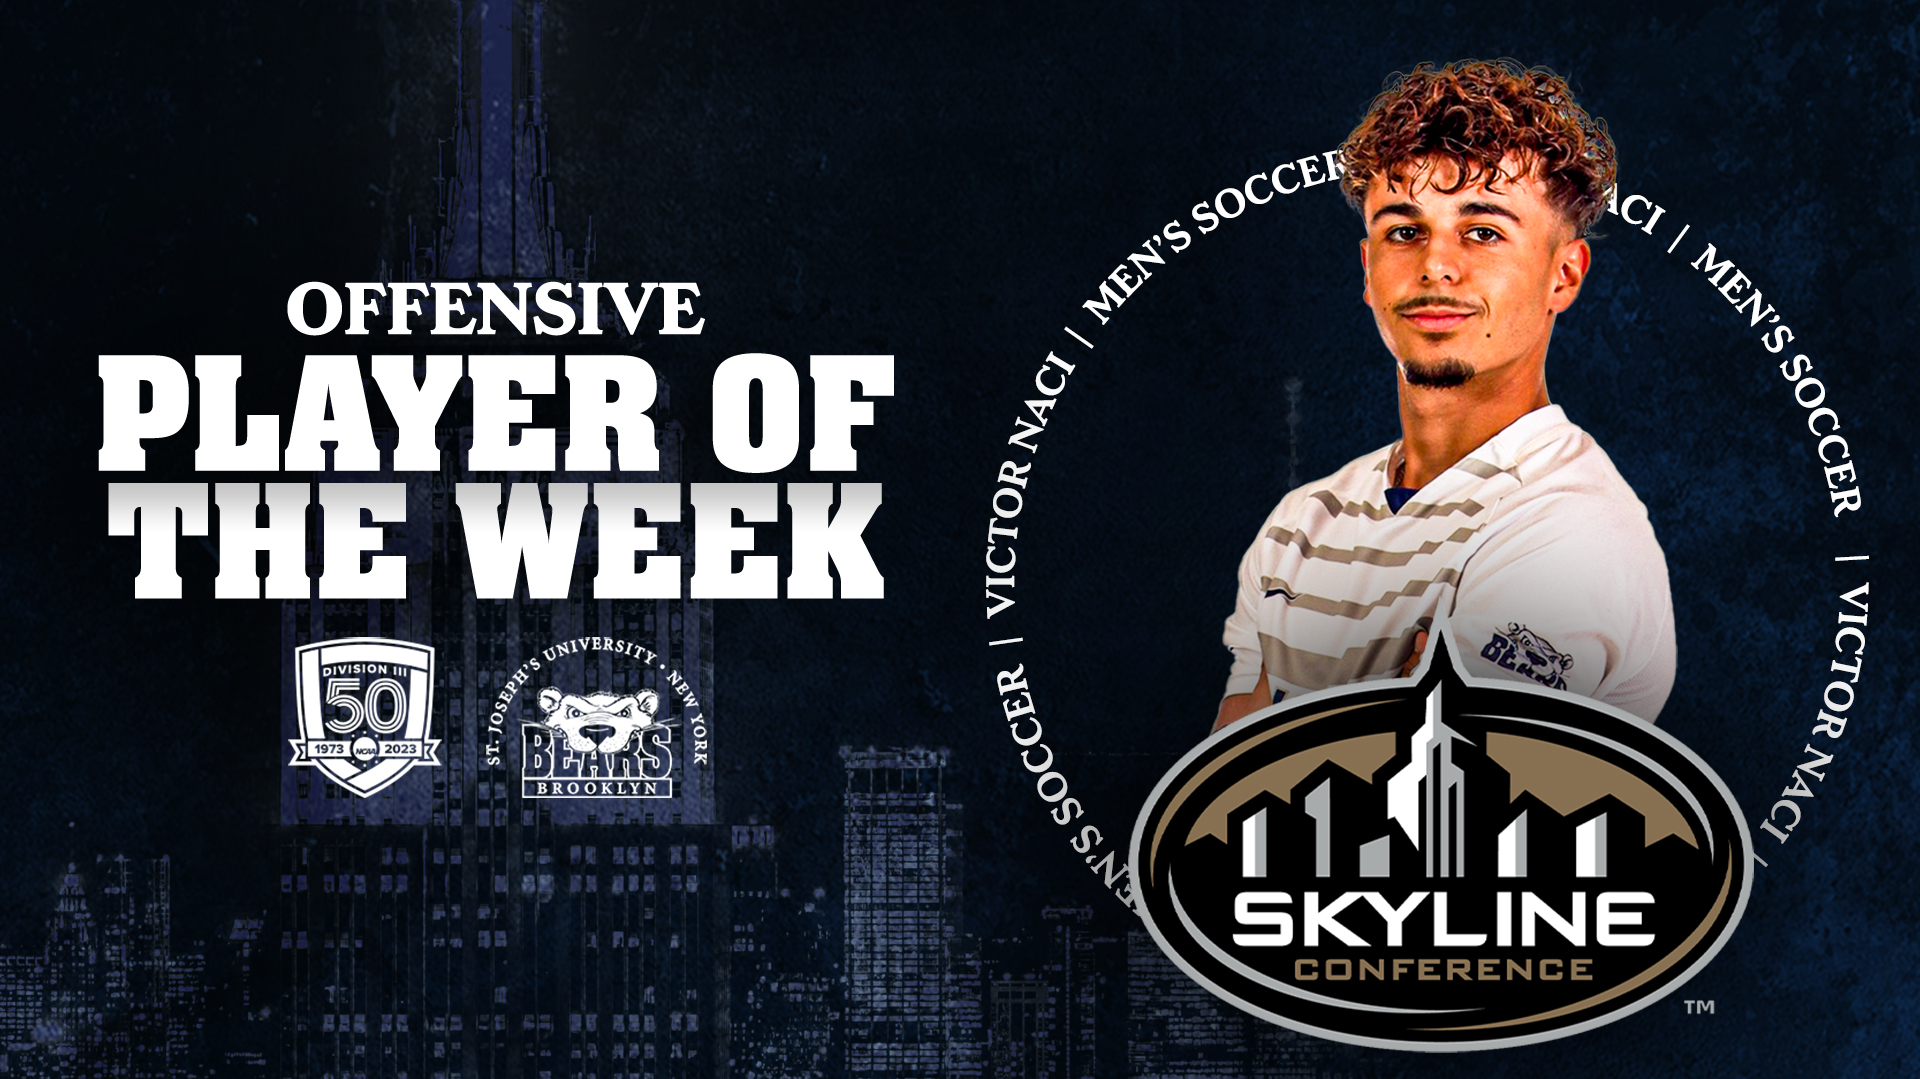 Naci Claims Skyline Men’s Soccer Offensive Player of the Week Honors; Chimborazo to Weekly Honor Roll